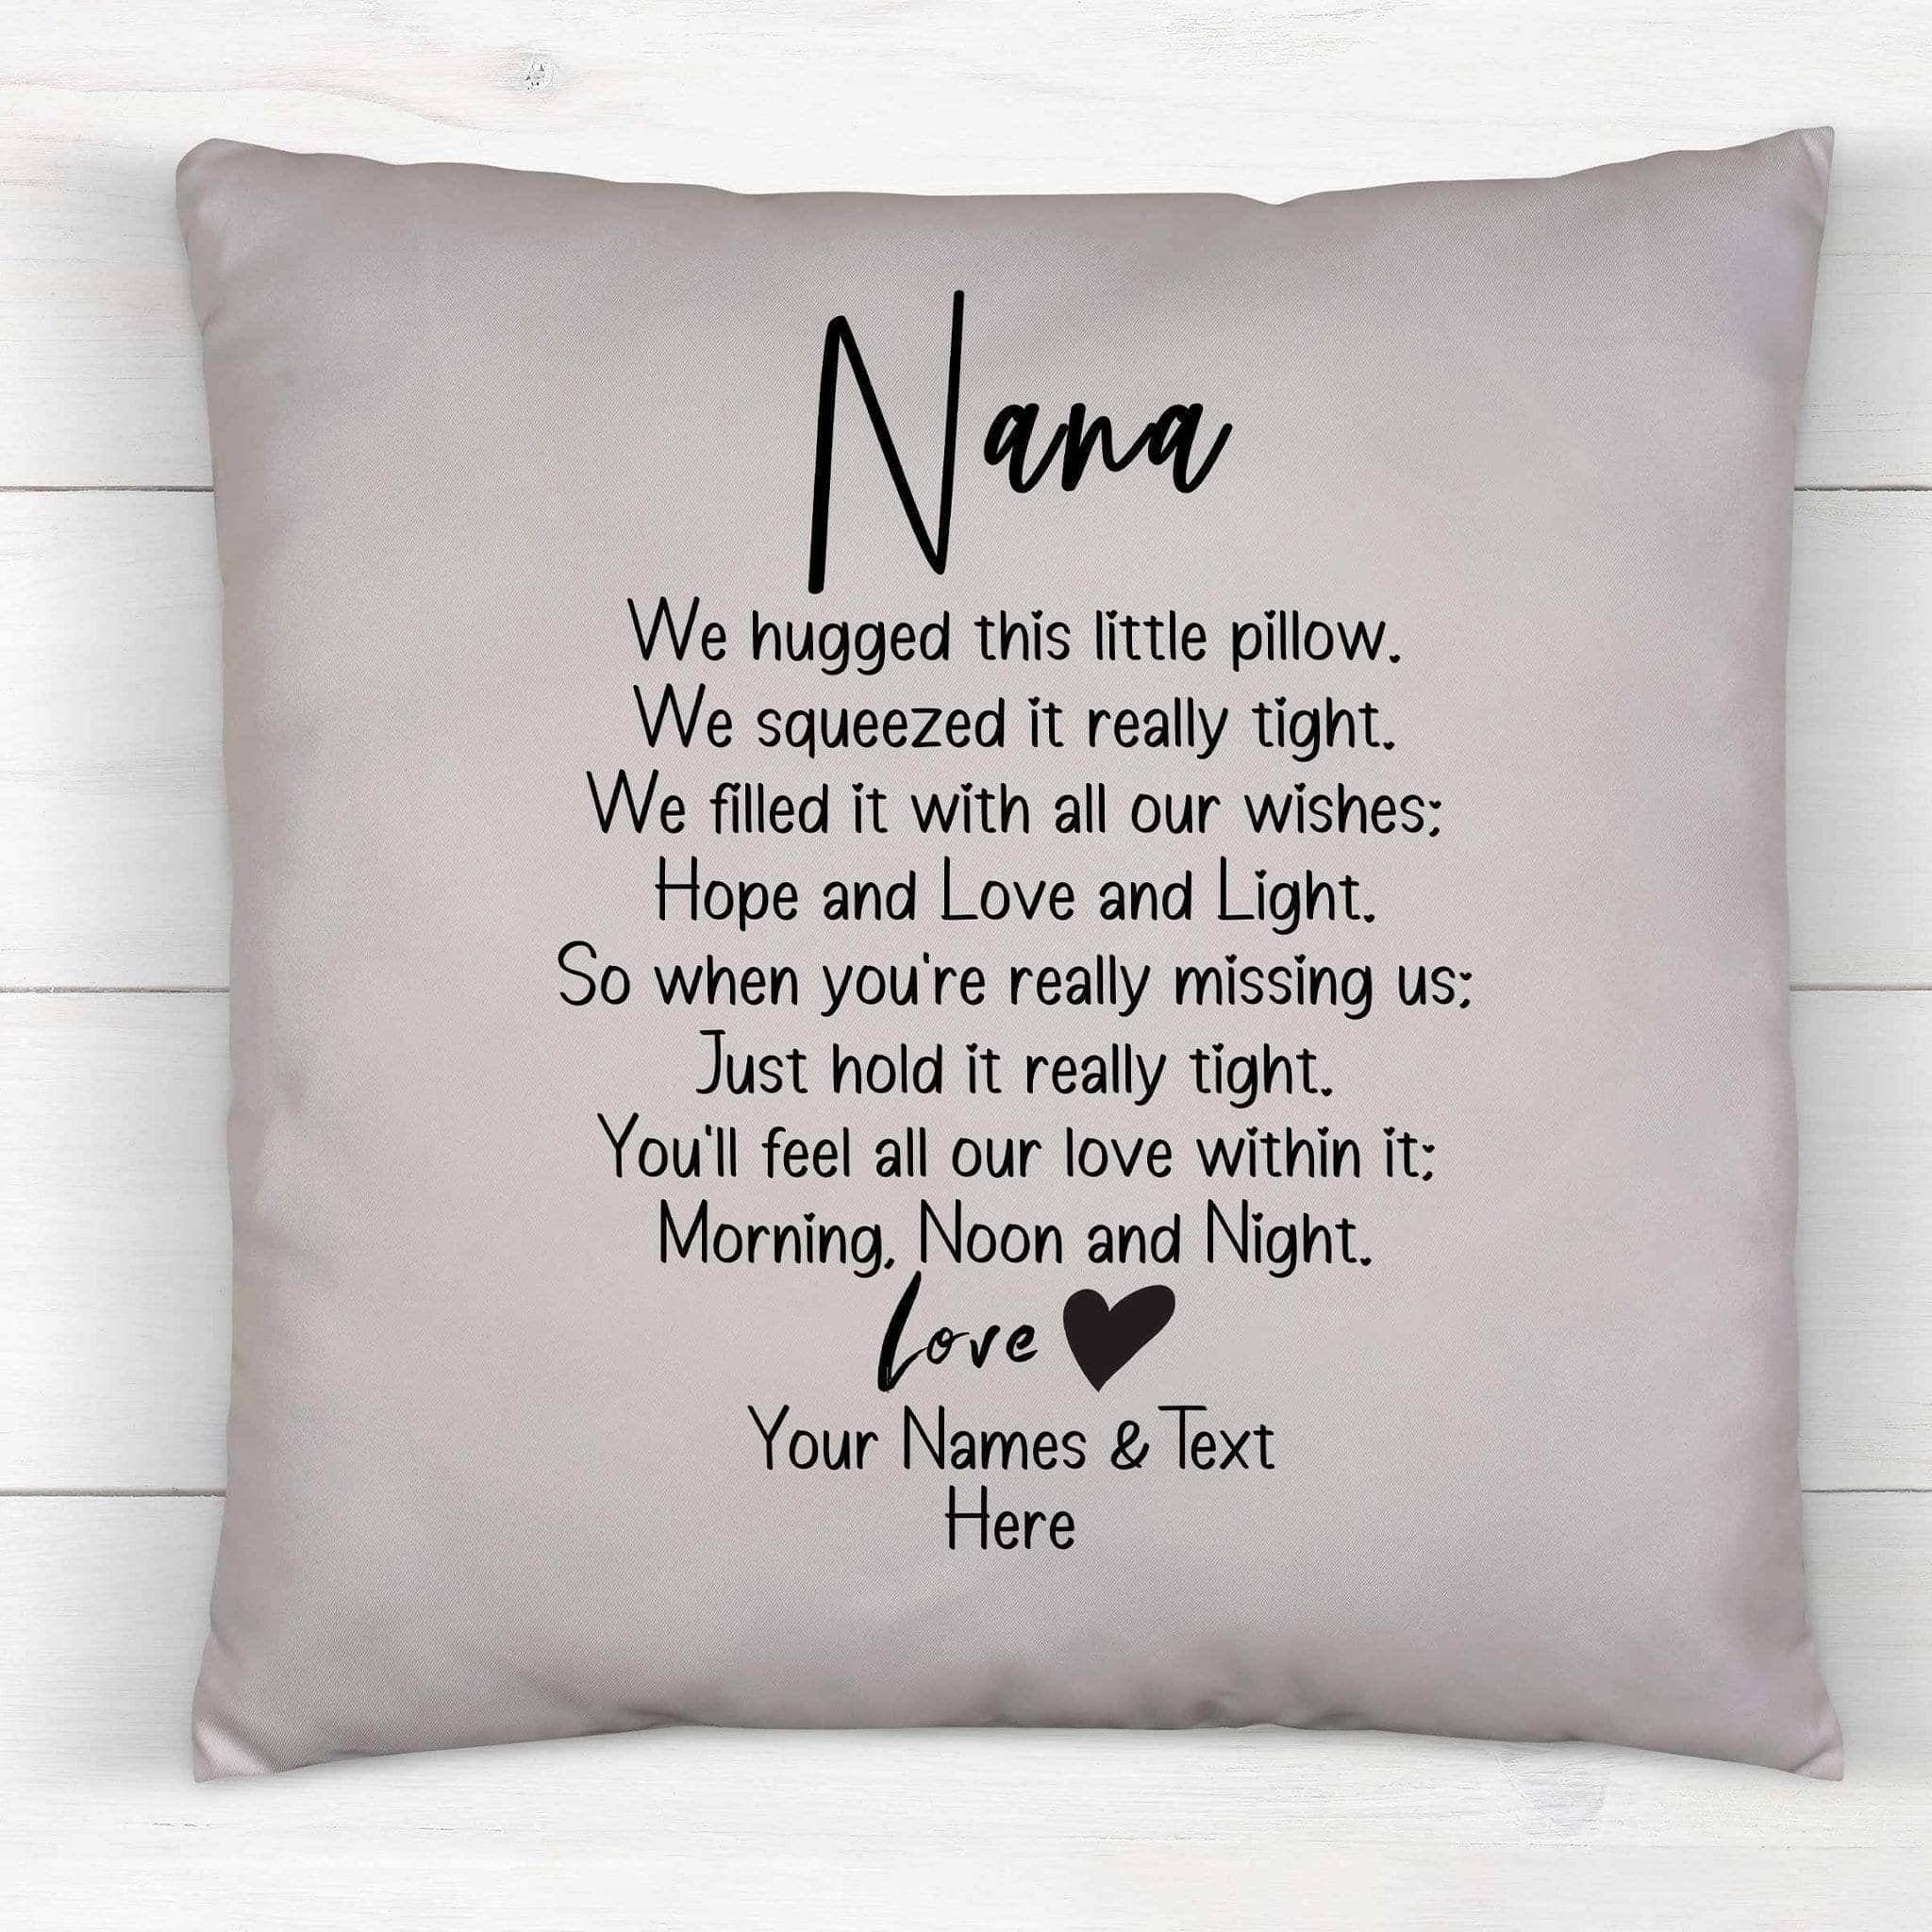 Nana We Hugged This Little Pillow Poem v2 Personalized Throw PillowCustomly Gifts